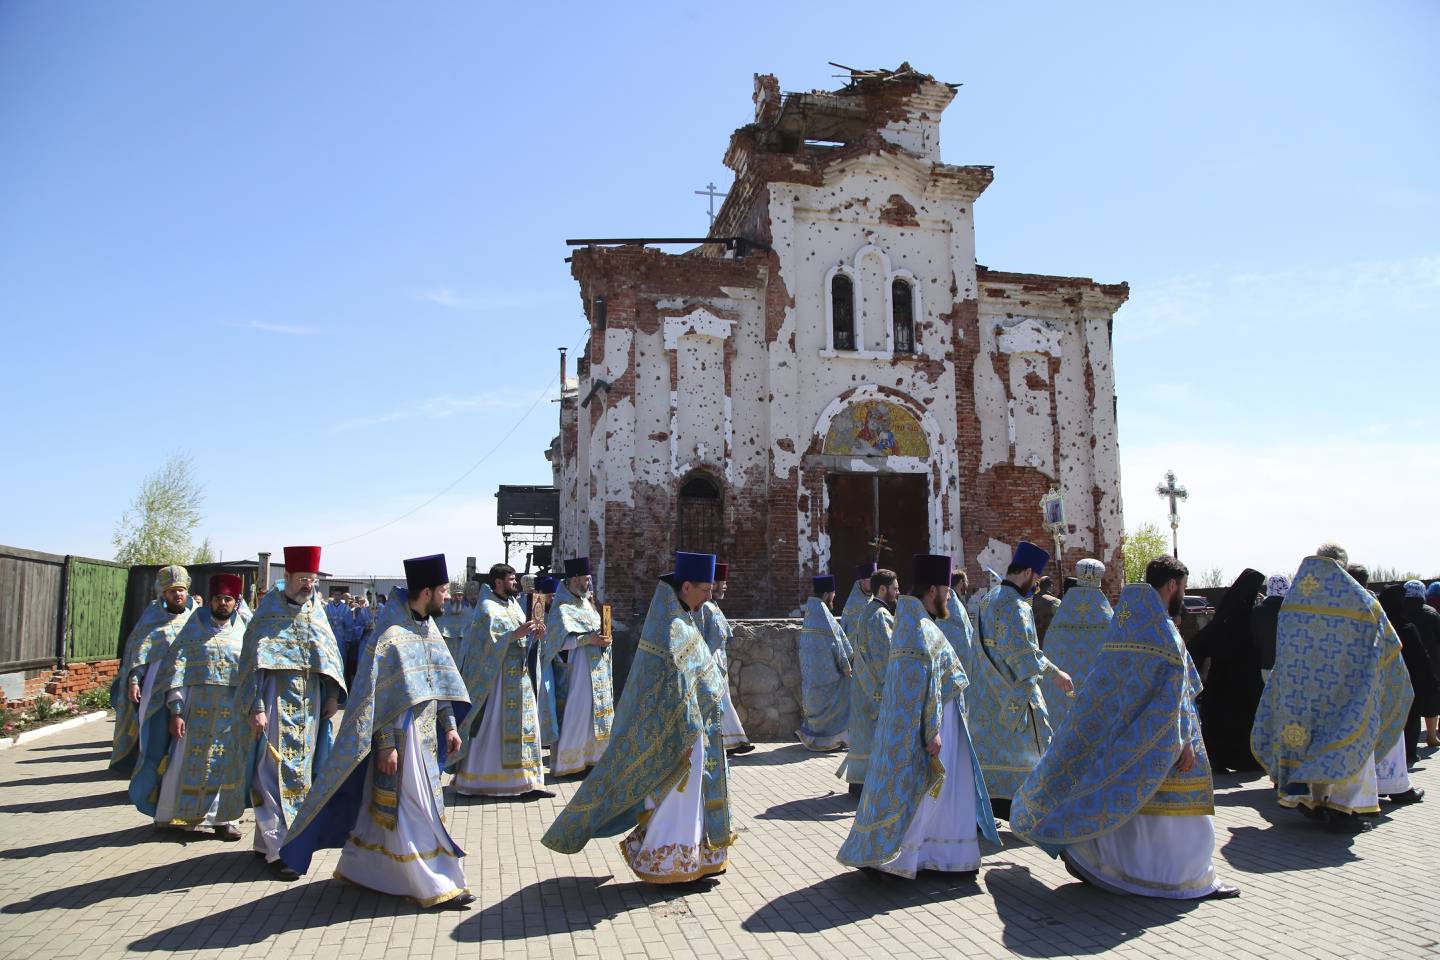 Priests attend a religion procession celebrating Orthodox Easter at the Iversky Monastery a monastery of the Ukrainian Orthodox Church (Moscow Patriarchate) damaged by shelling, outside Donetsk, Ukraine, Tuesday, May 4, 2021. (AP Photo/Alexei Alexandrov)